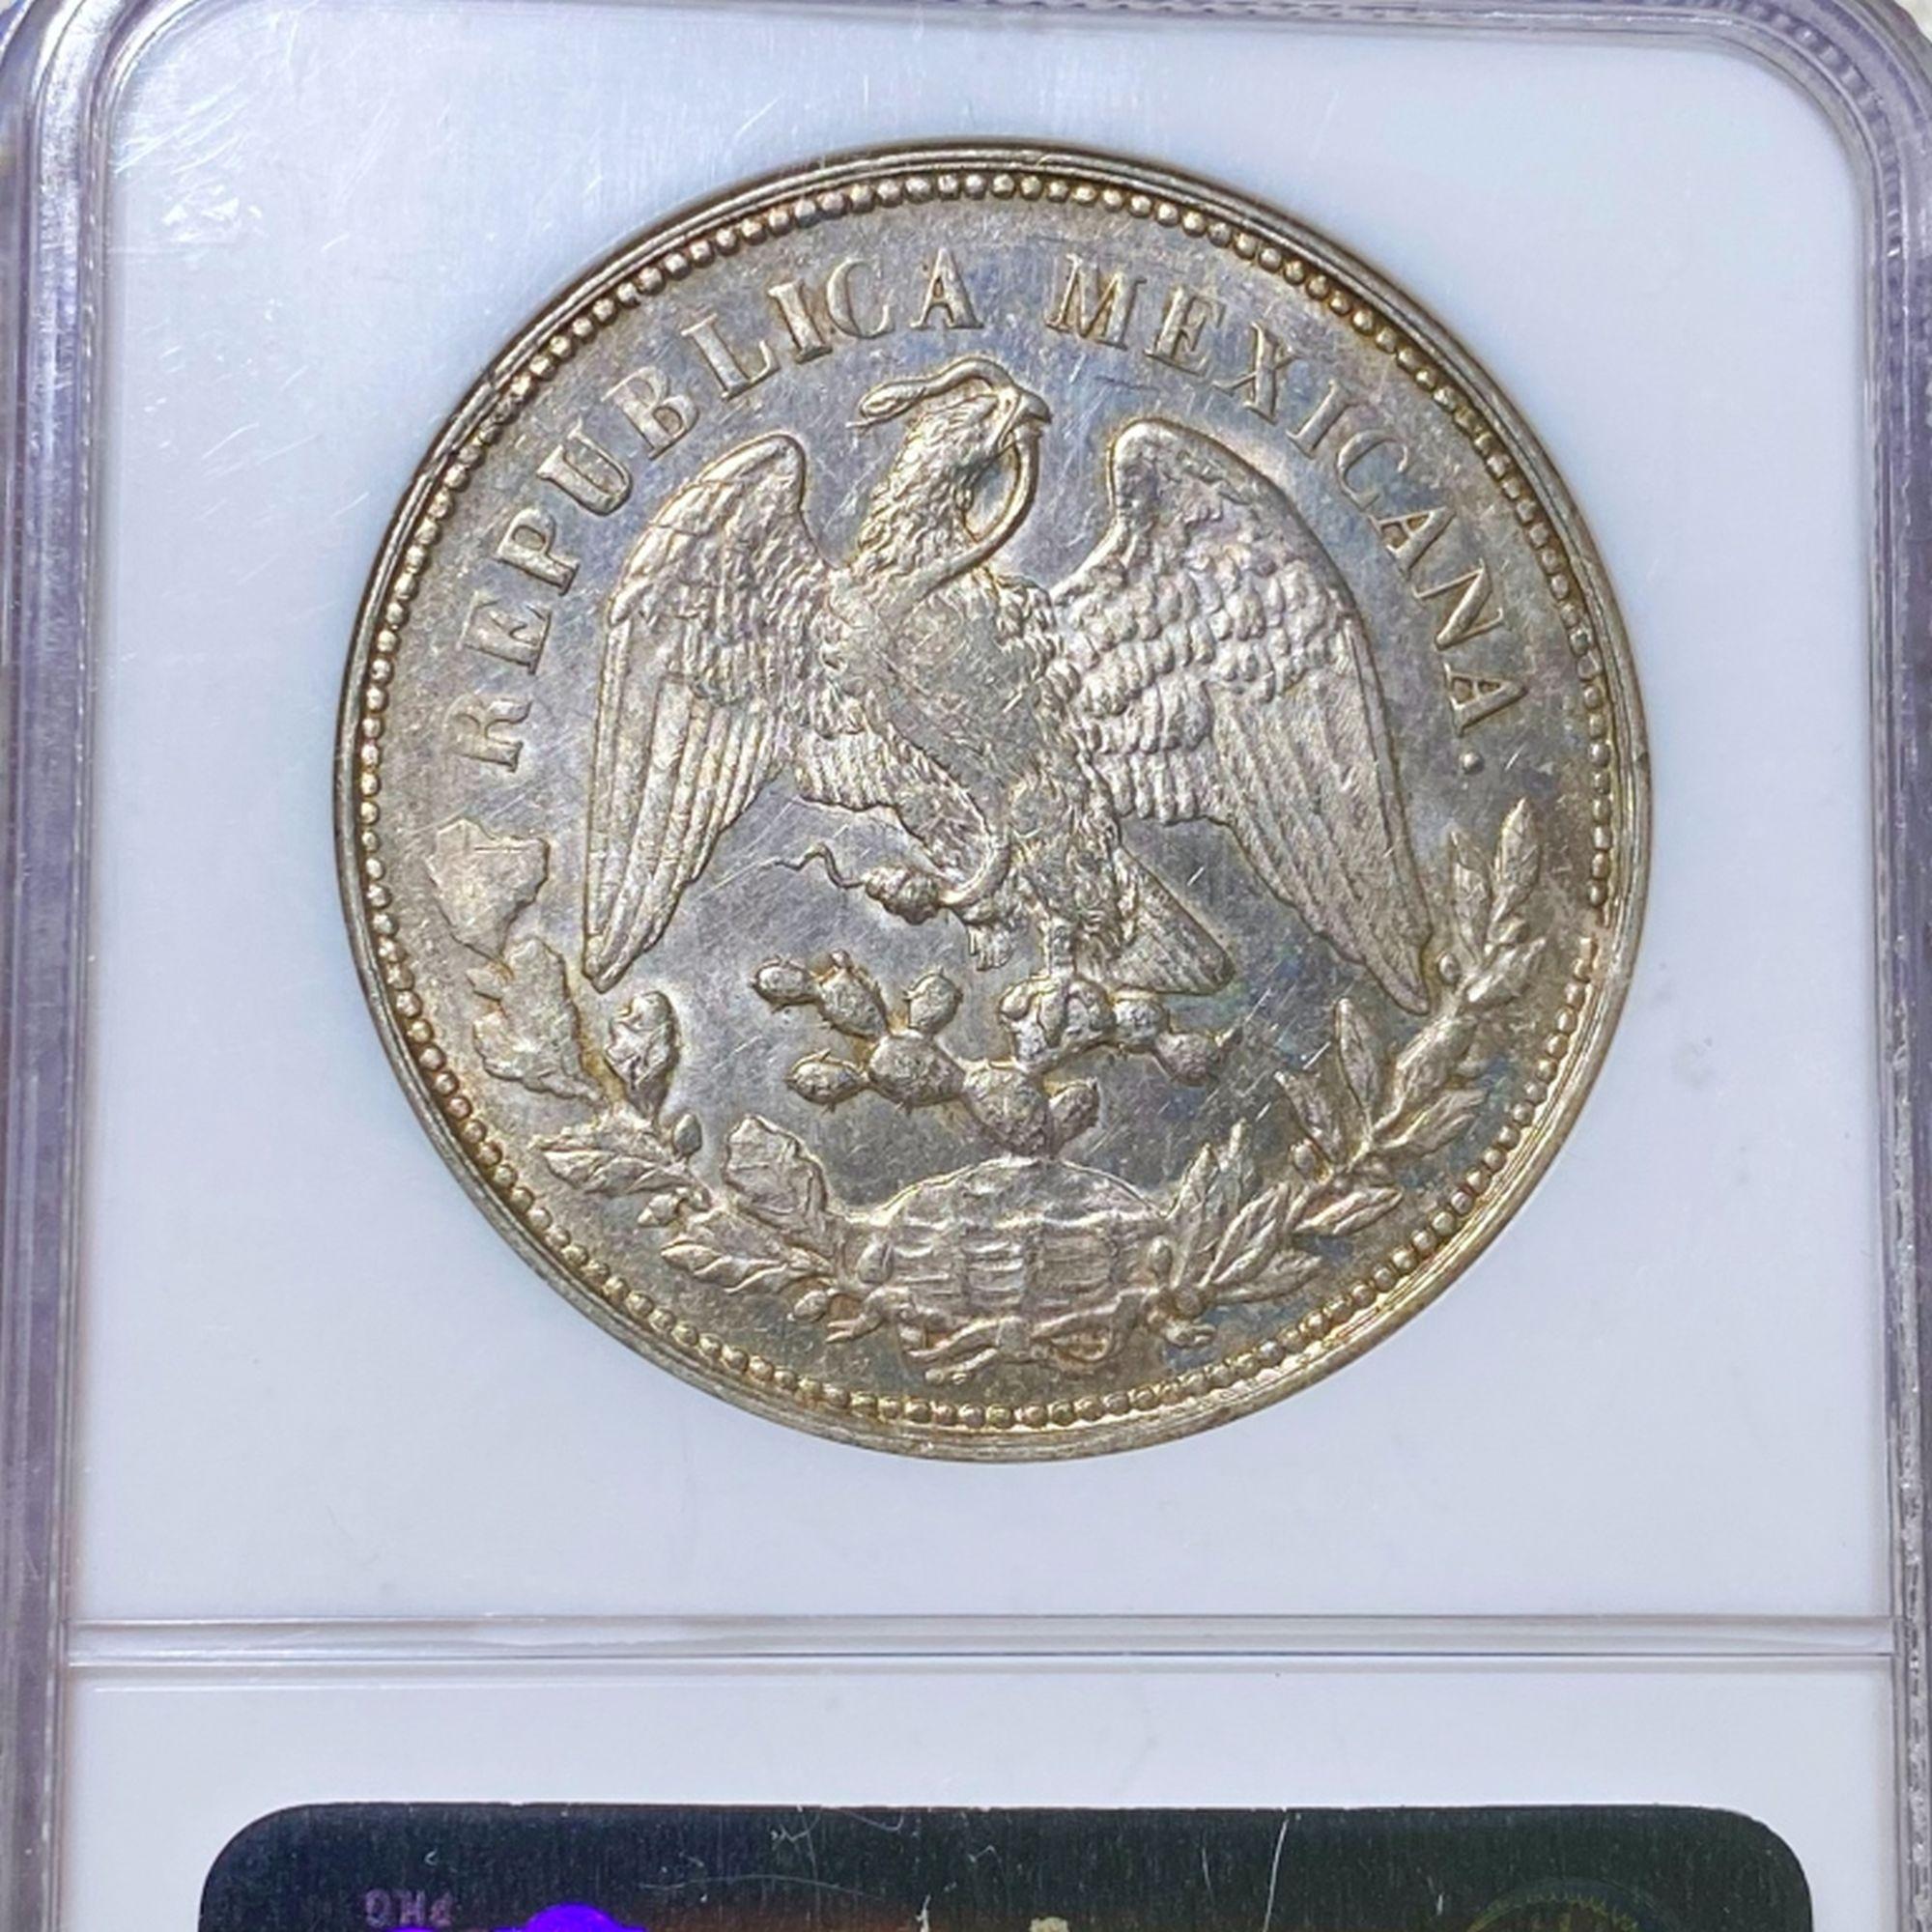 1903 Mexican Silver 8 Reales NGC - AU58